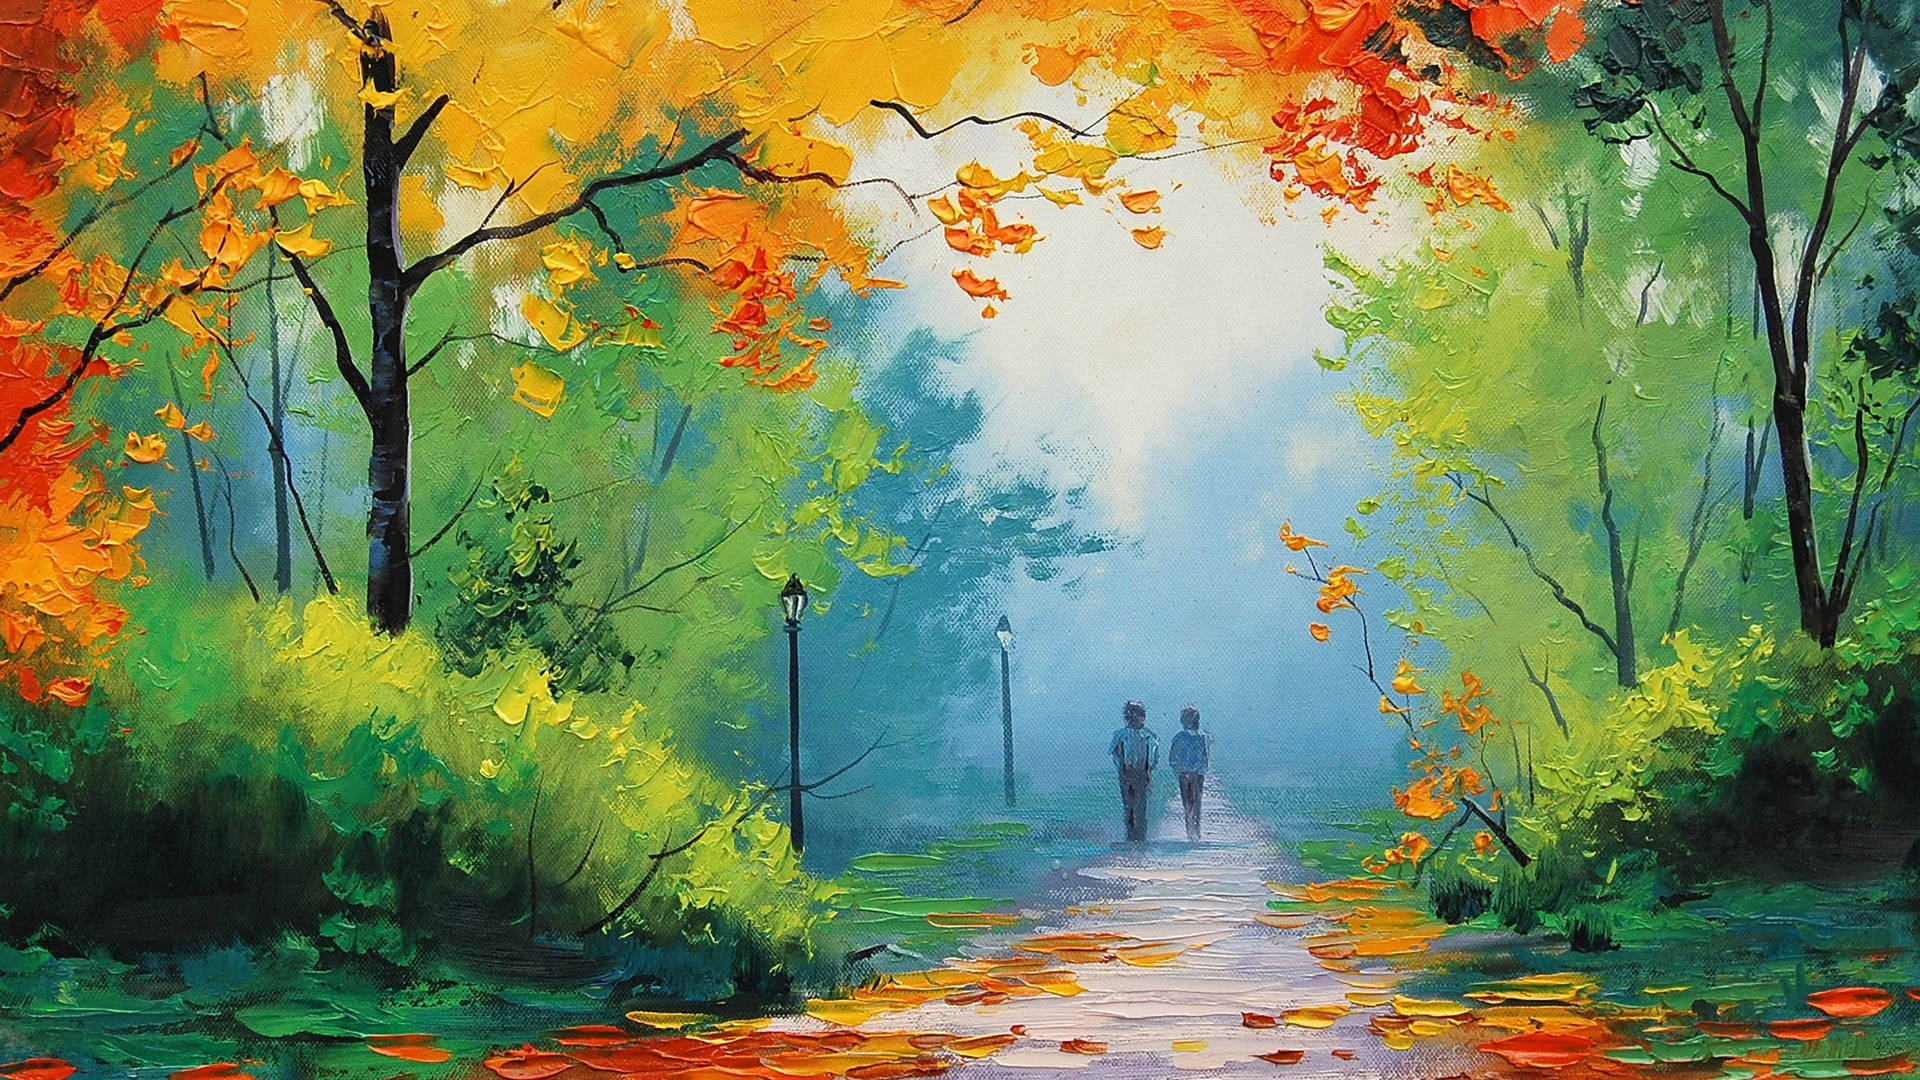 Nature Love Painting Of Couple